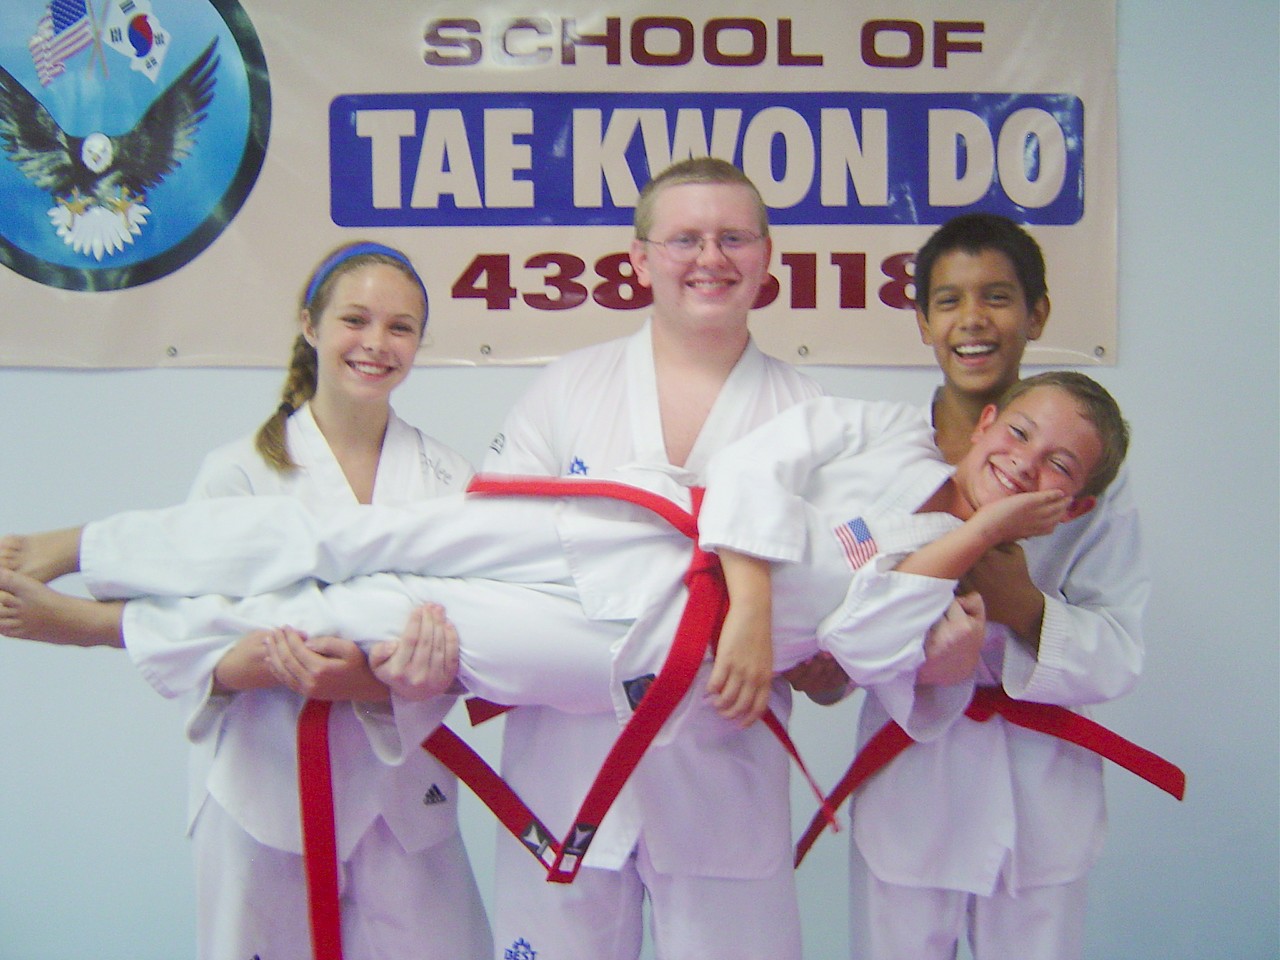 Red belts